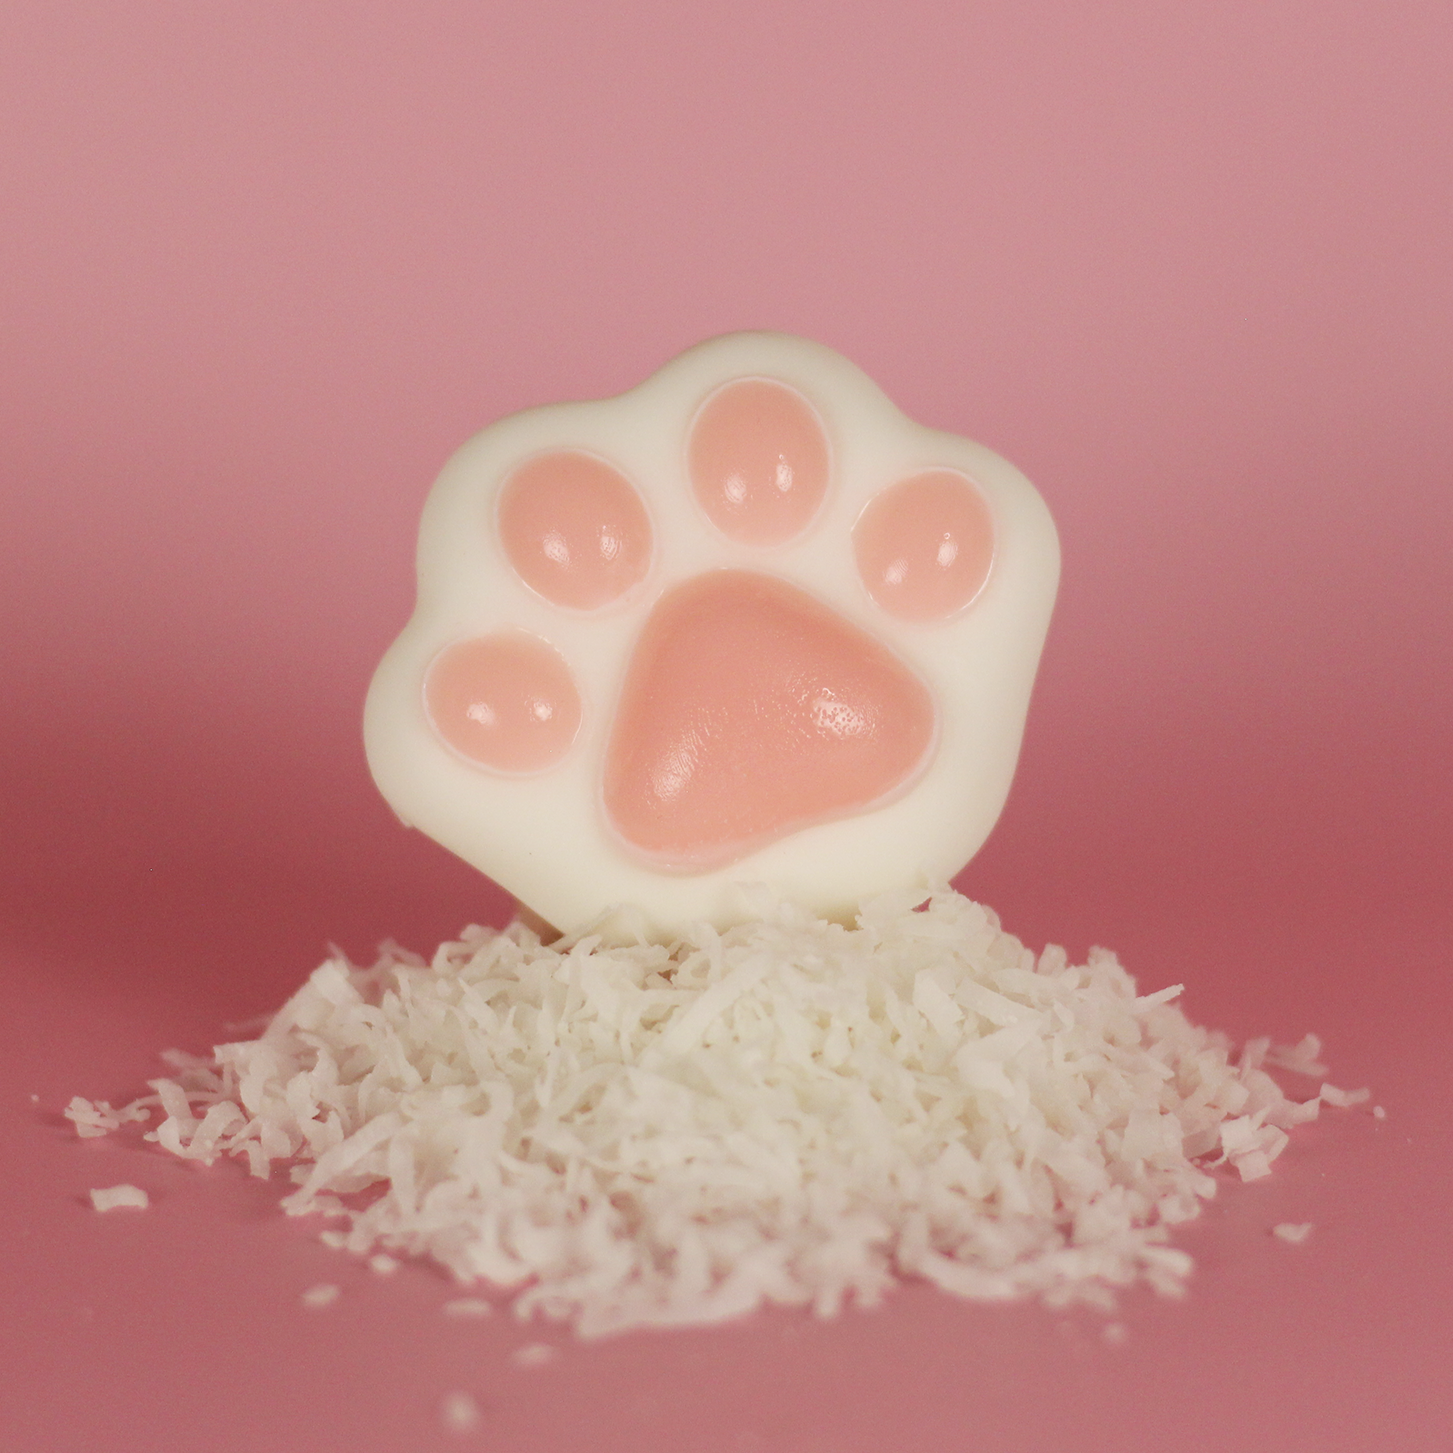 The Only Paws Gift Box - Frolic Creations - Soap - Cute Self Care - Kawaii Atheistic - Quirky Gift - Gift For Her